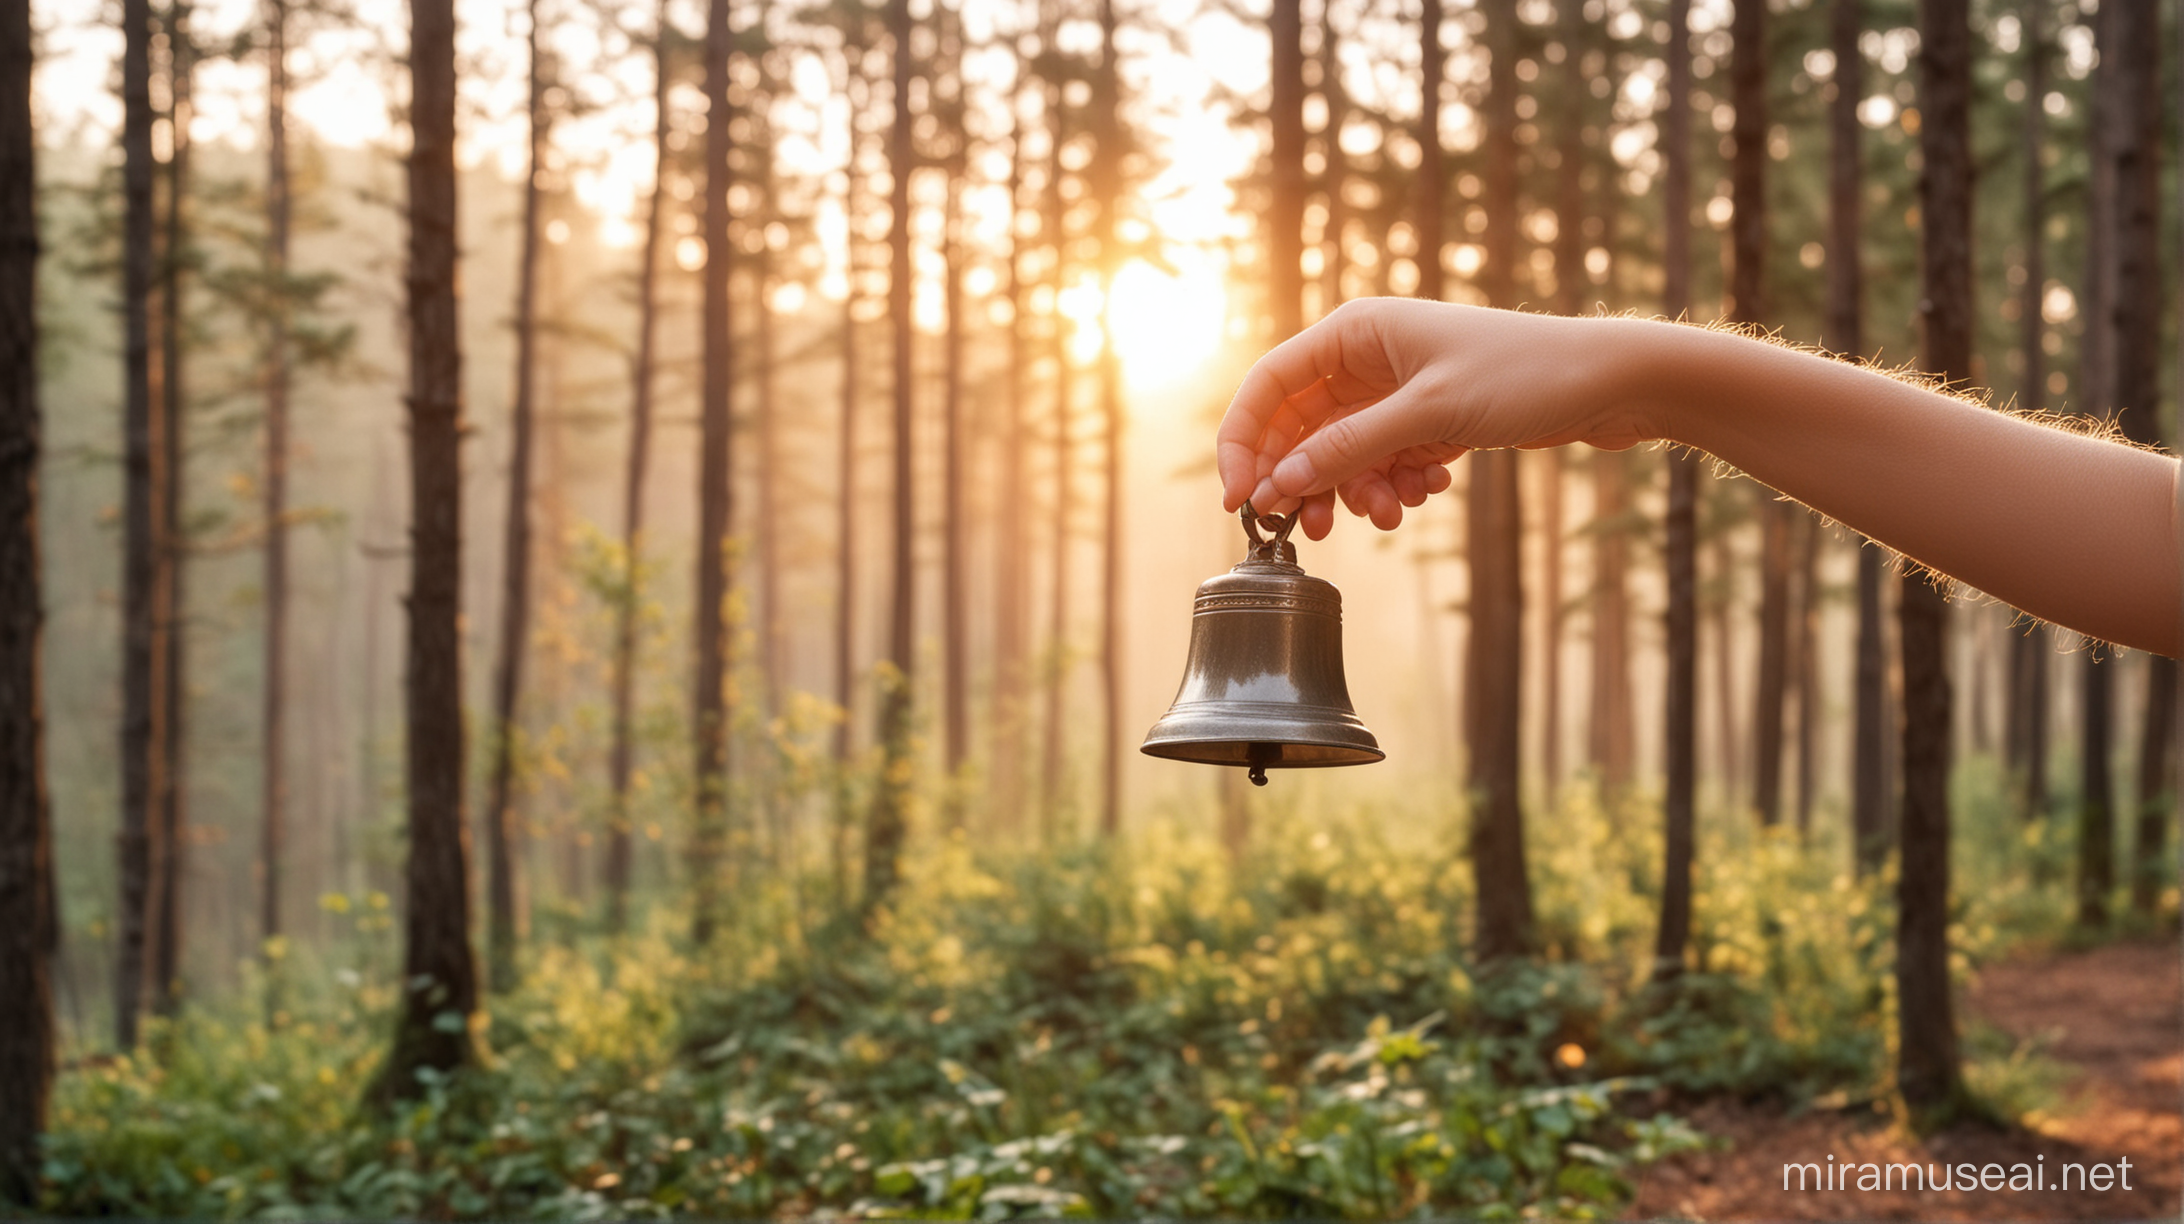 Child Ringing Bell in Sunrise Forest